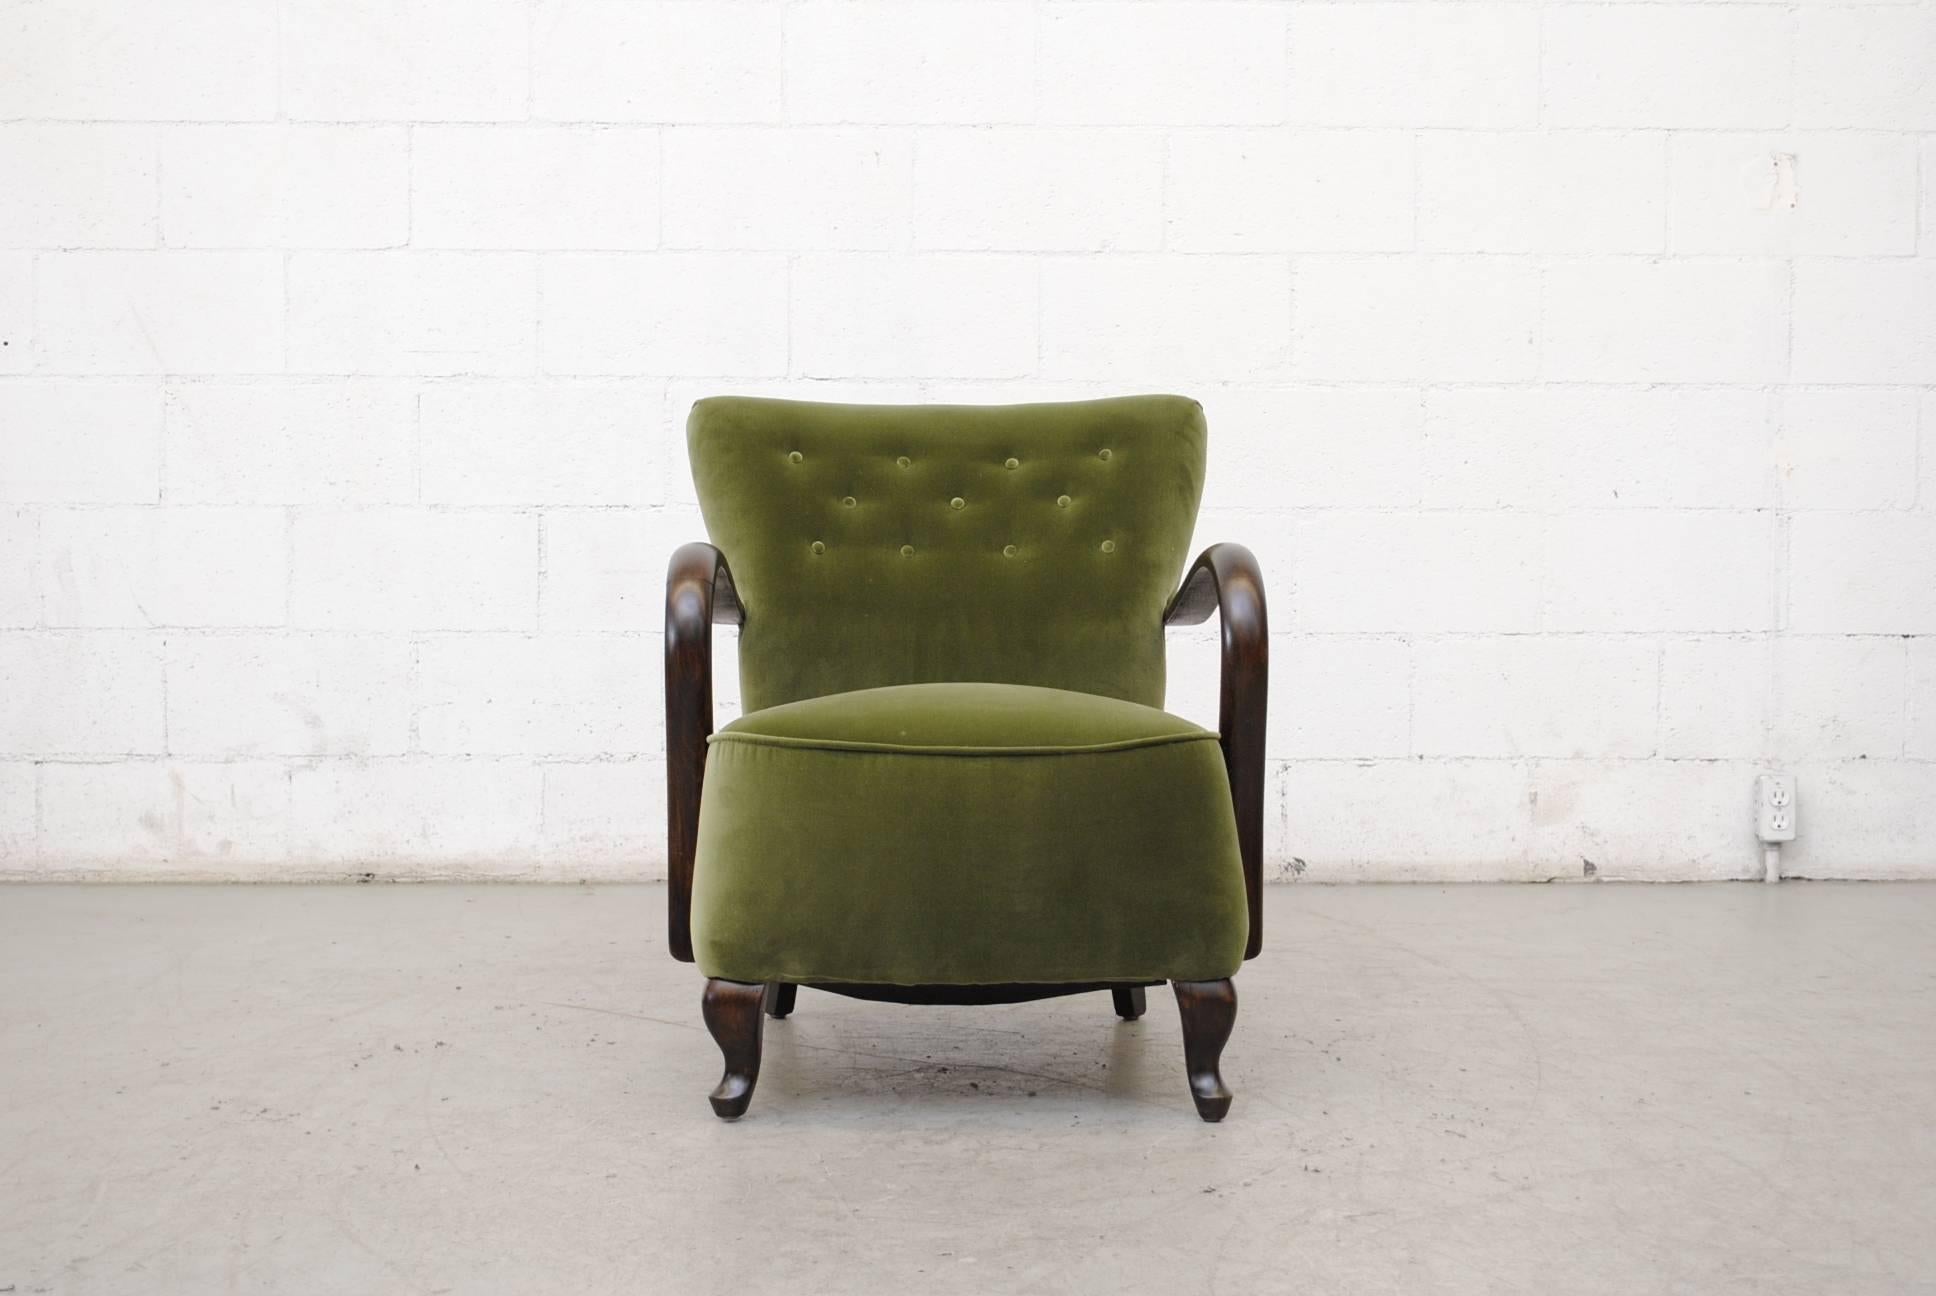 Gorgeous plump olive velvet tufted lounge chair with dark wood ribbon-like arm rests and fat claw-like feet. Frame in good original condition.